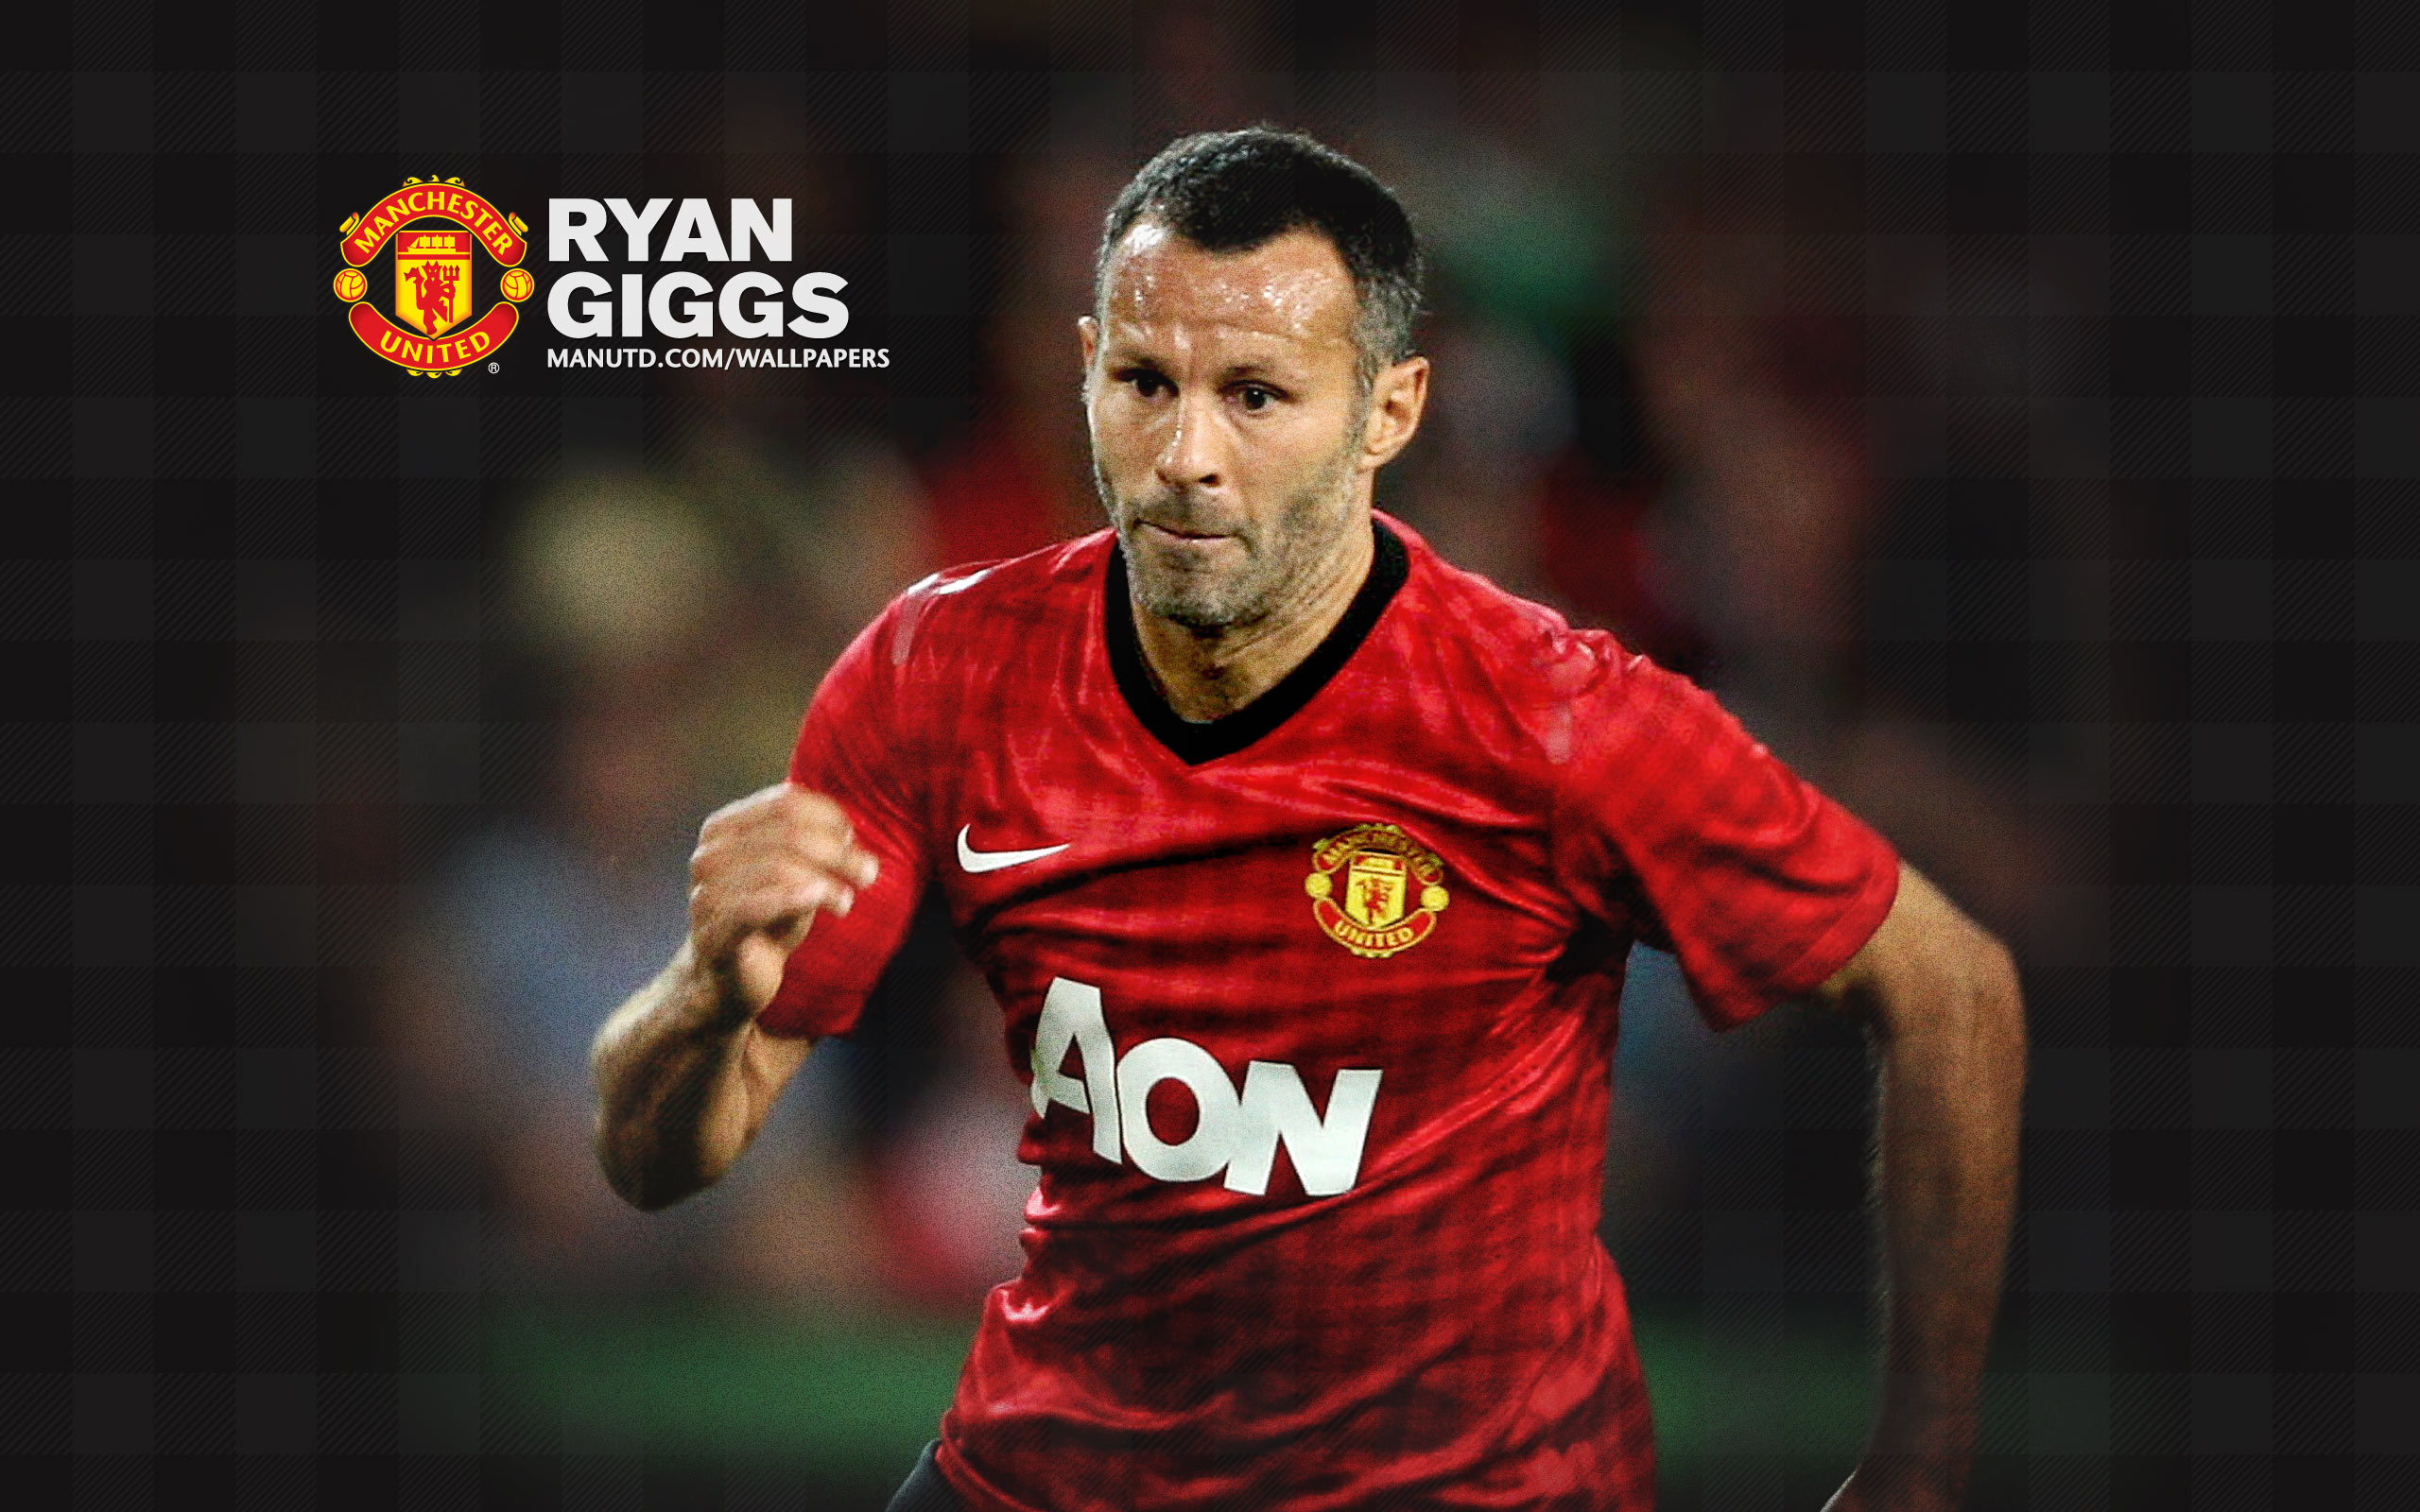 Manchester United Players Wallpaper 20122013 11 Ryan Giggs